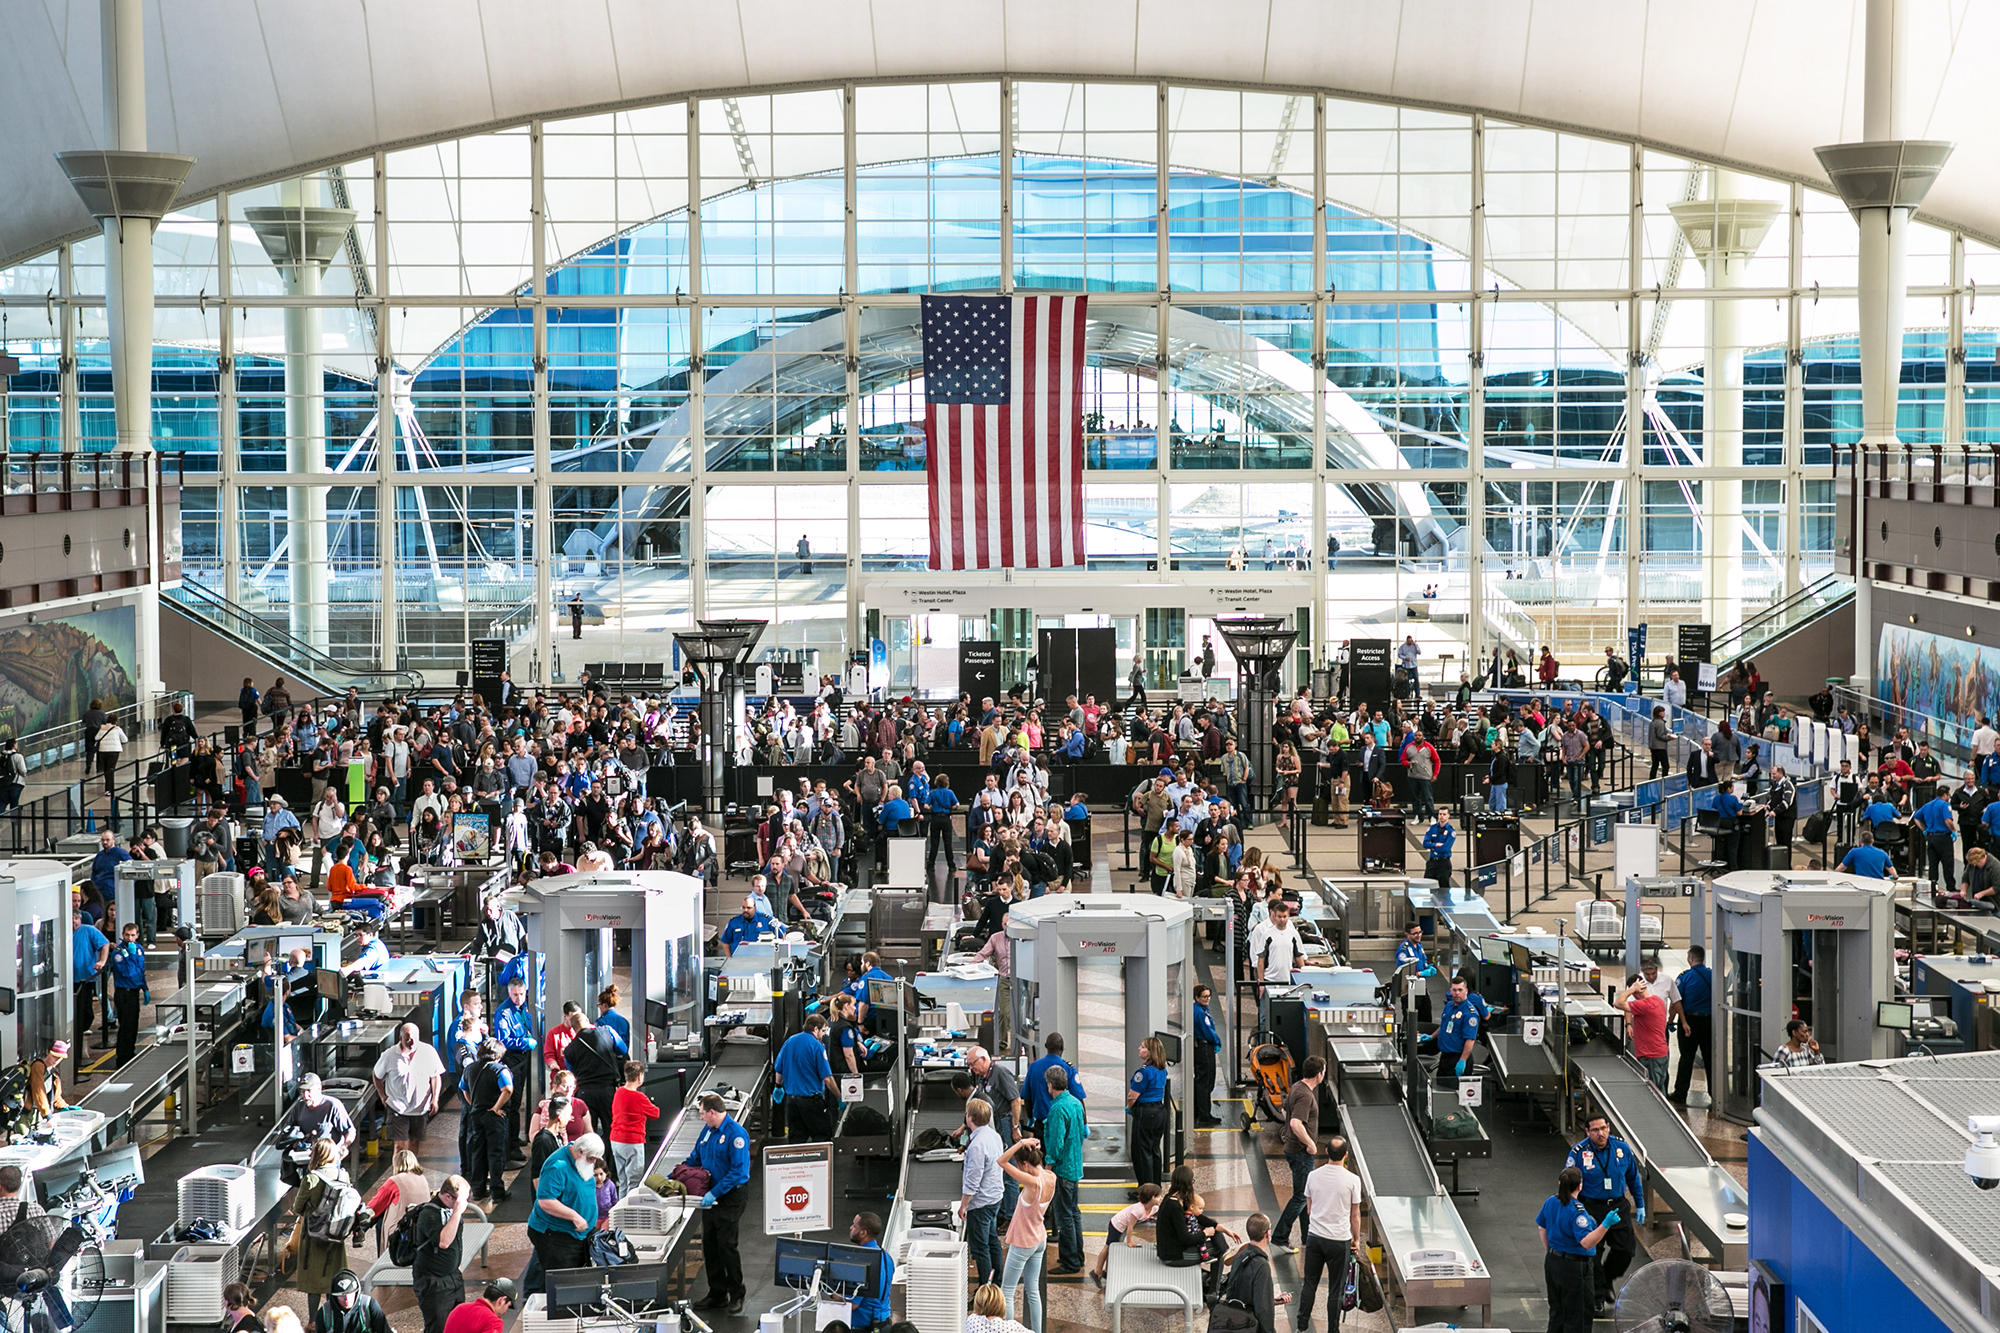 The U.S. Will Increase Airport Security Instead of Banning Laptops. Here's What It Means for Travelers